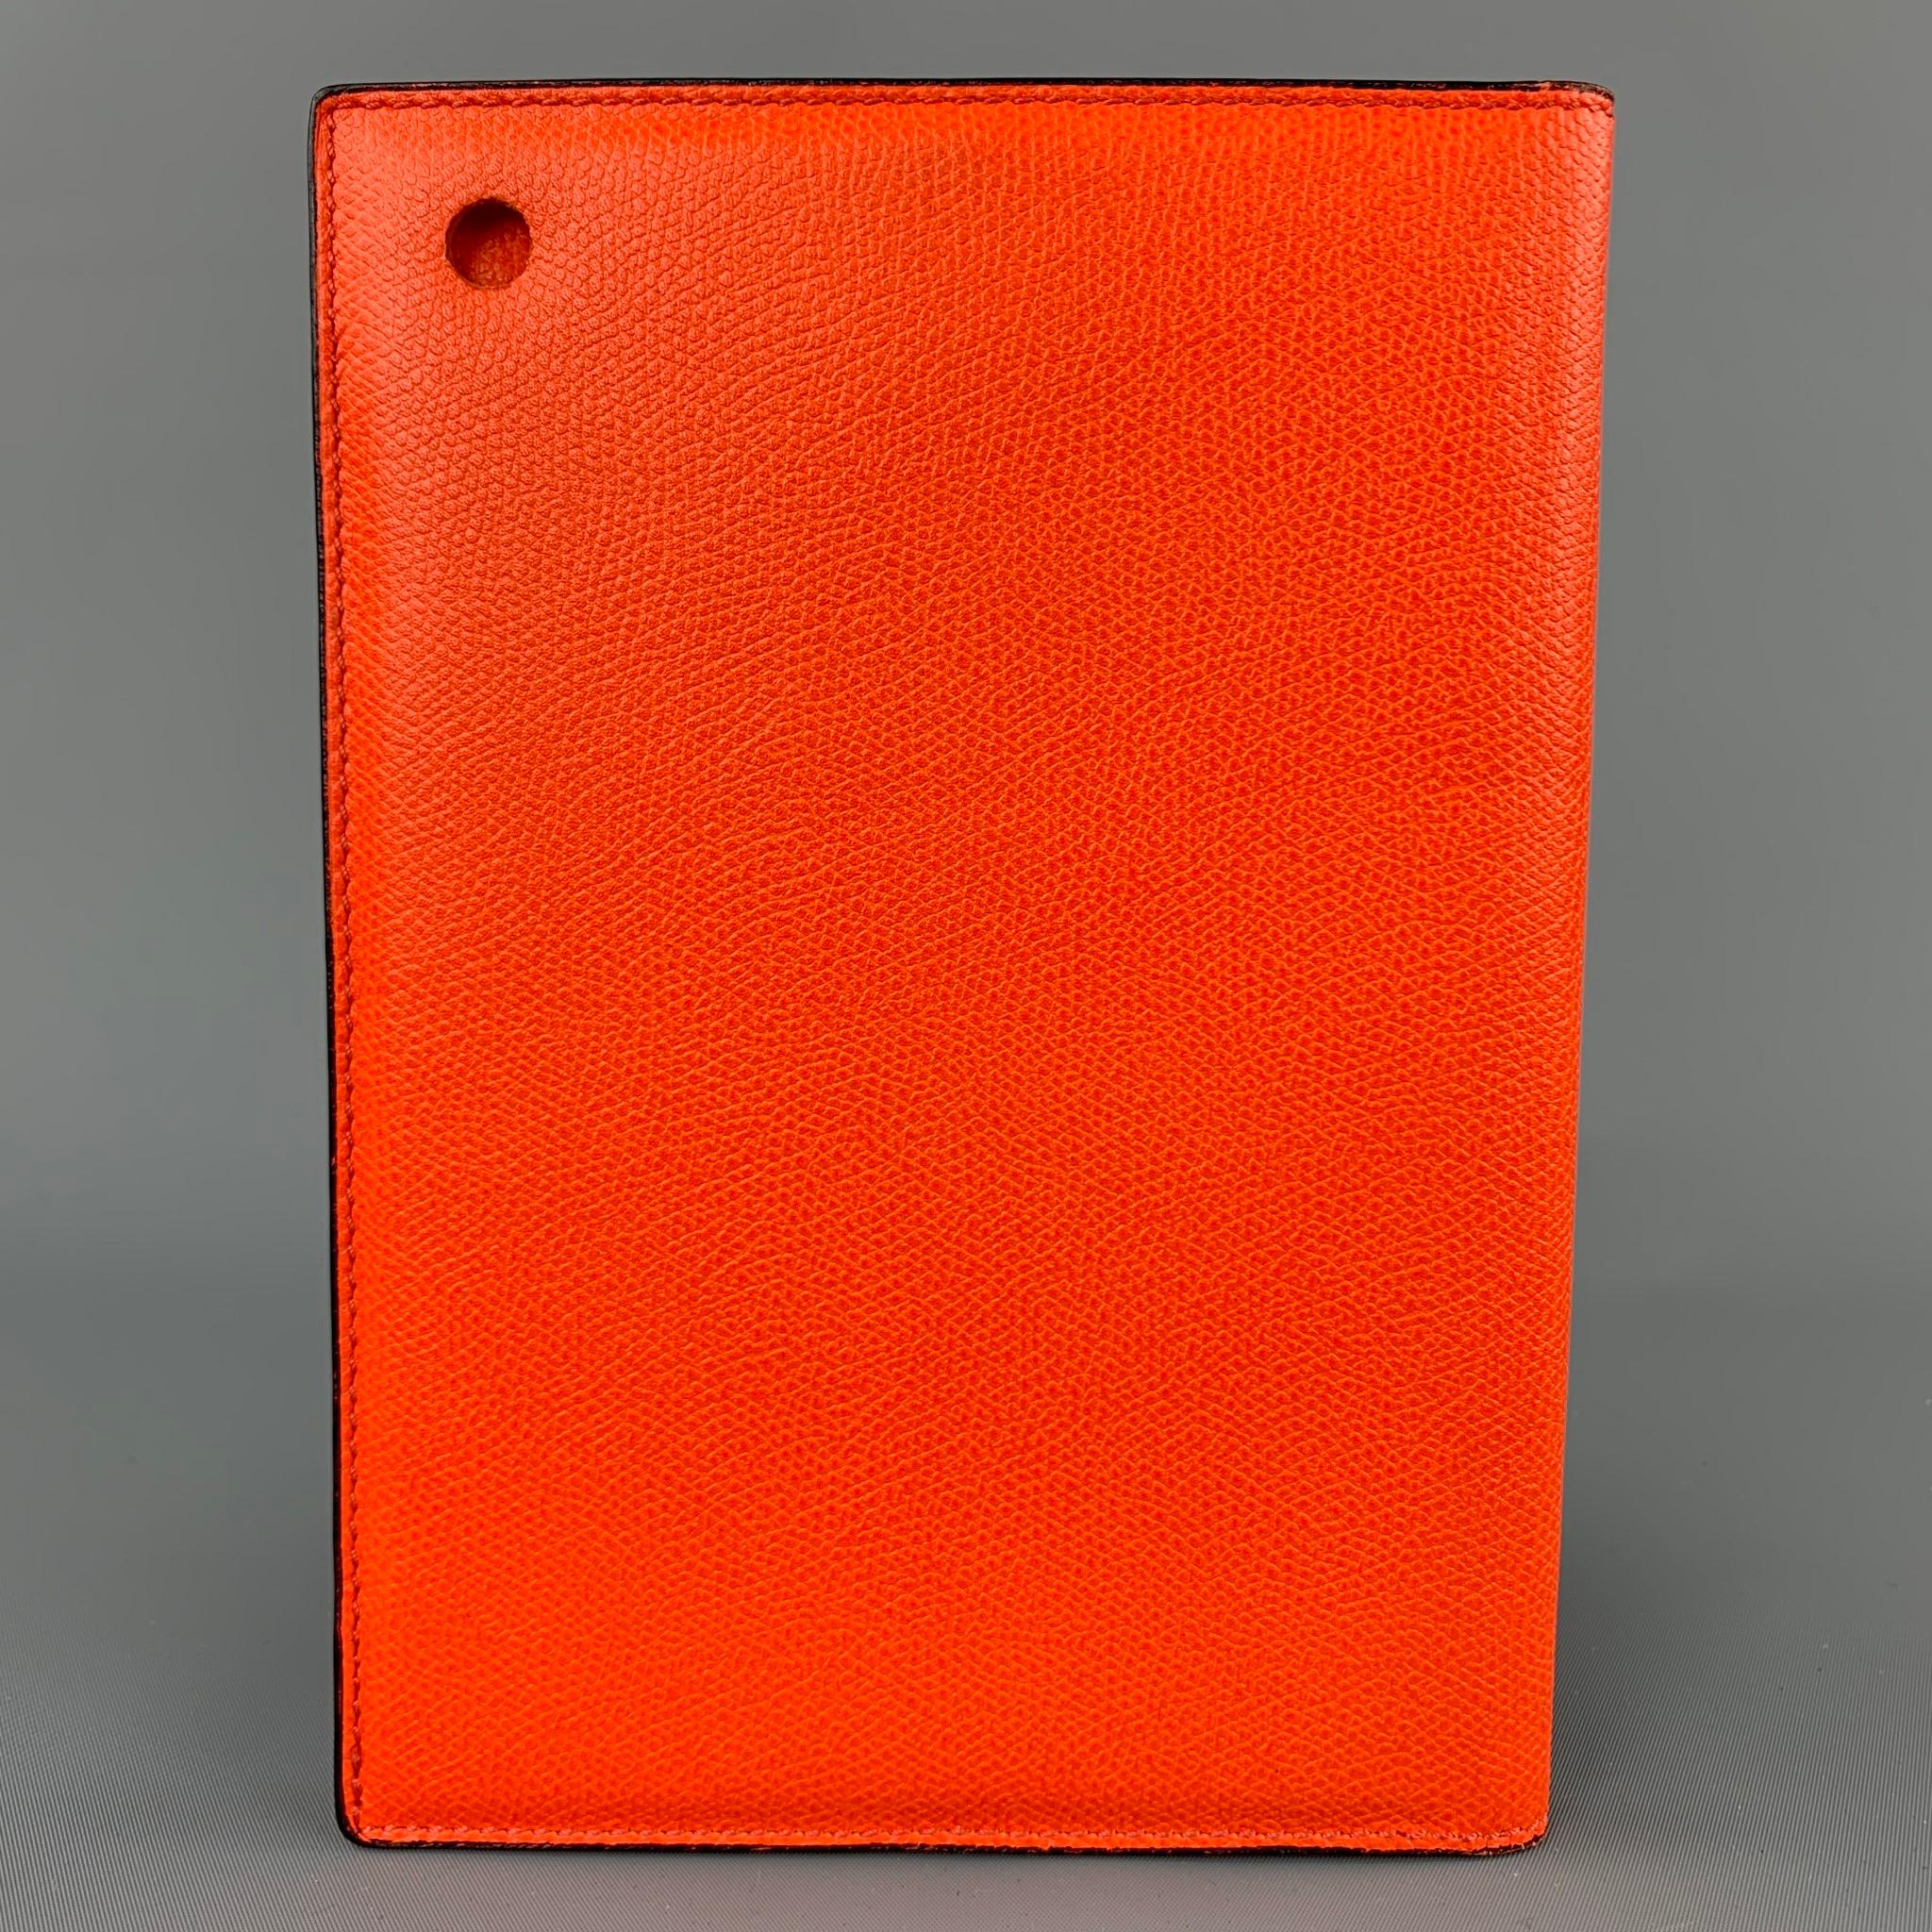 VALEXTRA iPad Case comes in a orange pebble grain leather featuring a bi-fold. Fits a iPad Mini.

Very Good Pre-Owned Condition.
Original Retail Price: $572.00

Case Measurements:

Height: 8.5 in.
Width: 6 in.